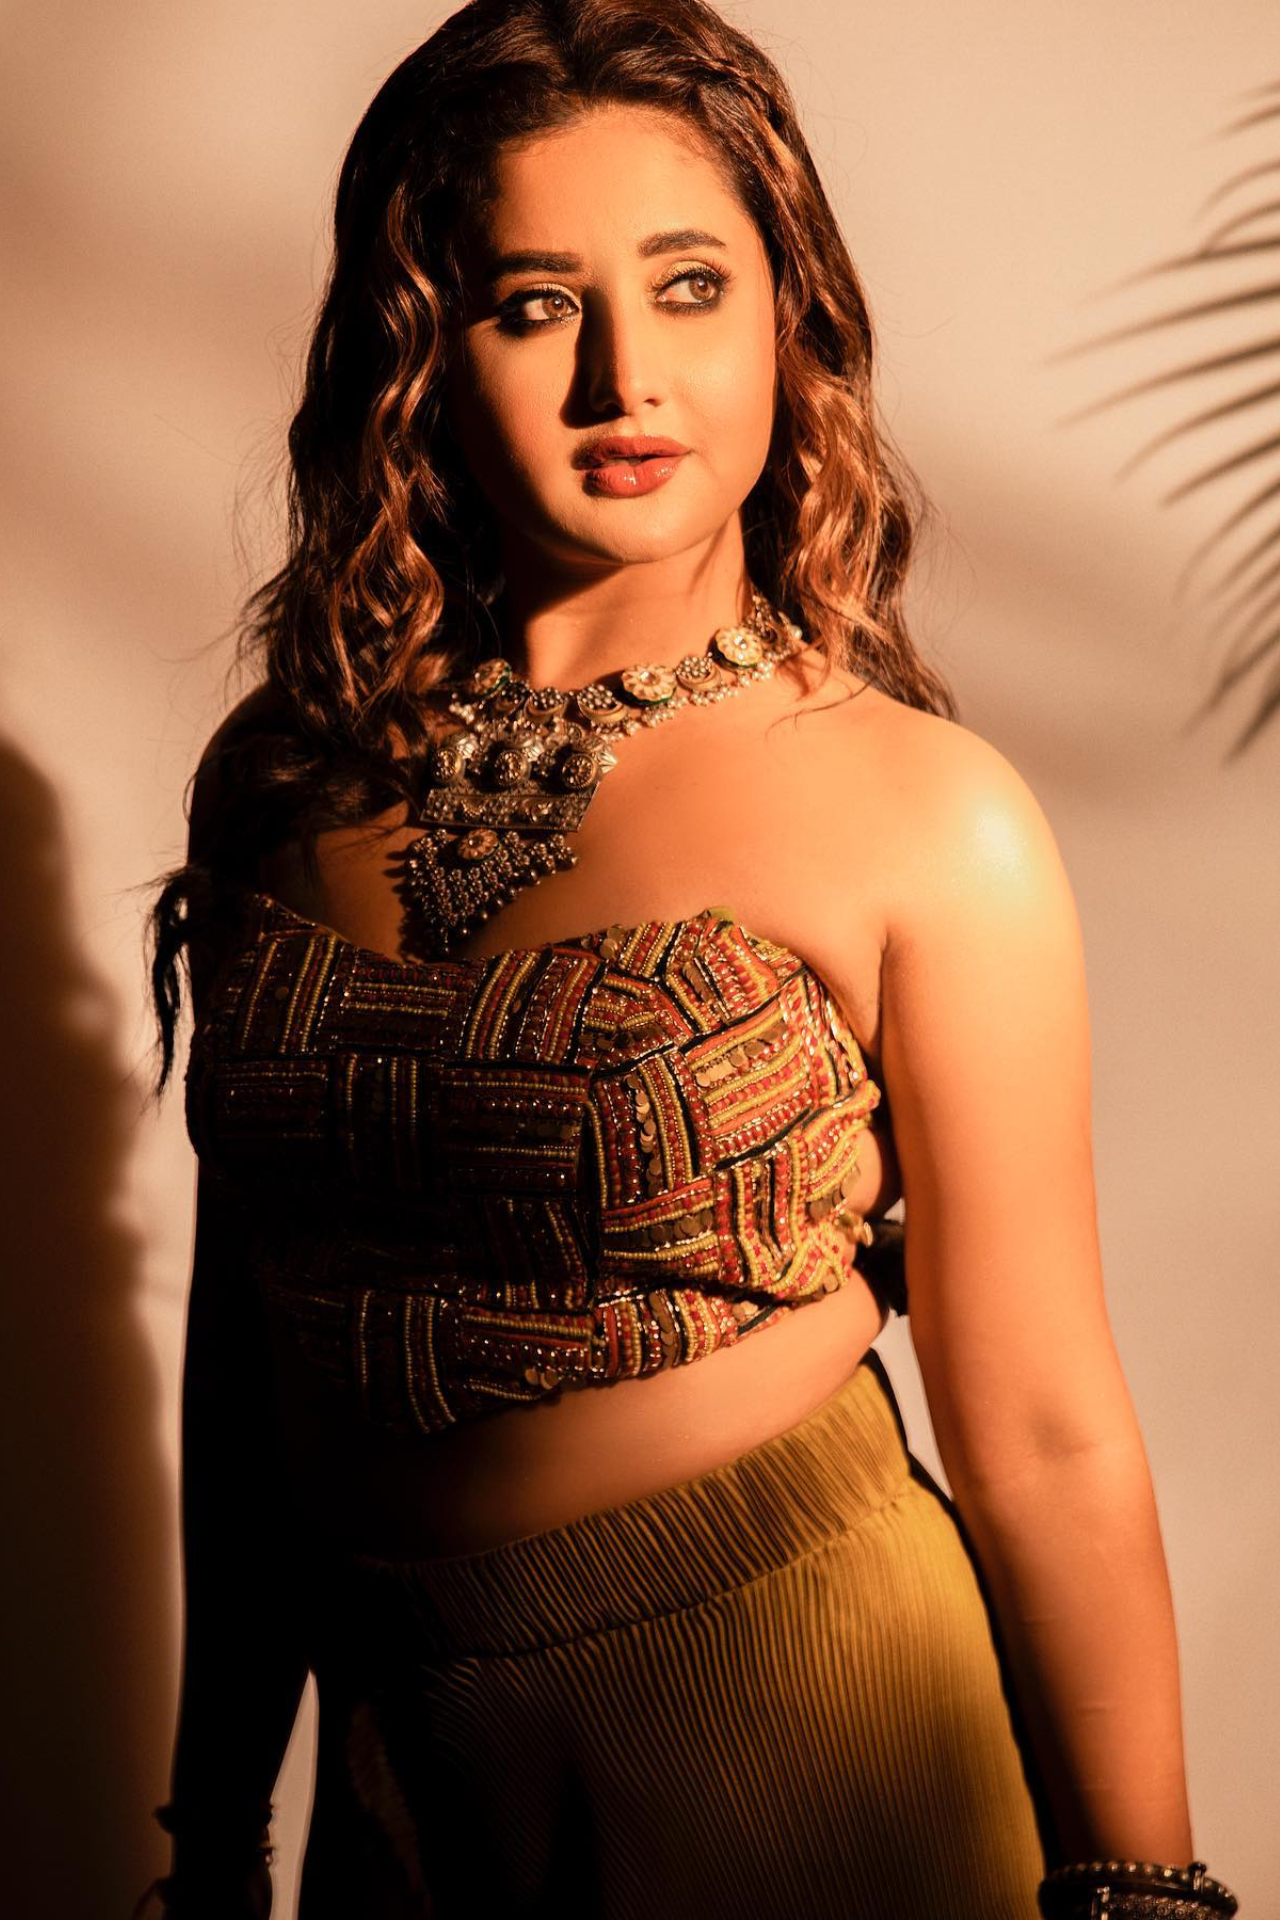 6 Times Rashami Desai refined hotness with her style statements
